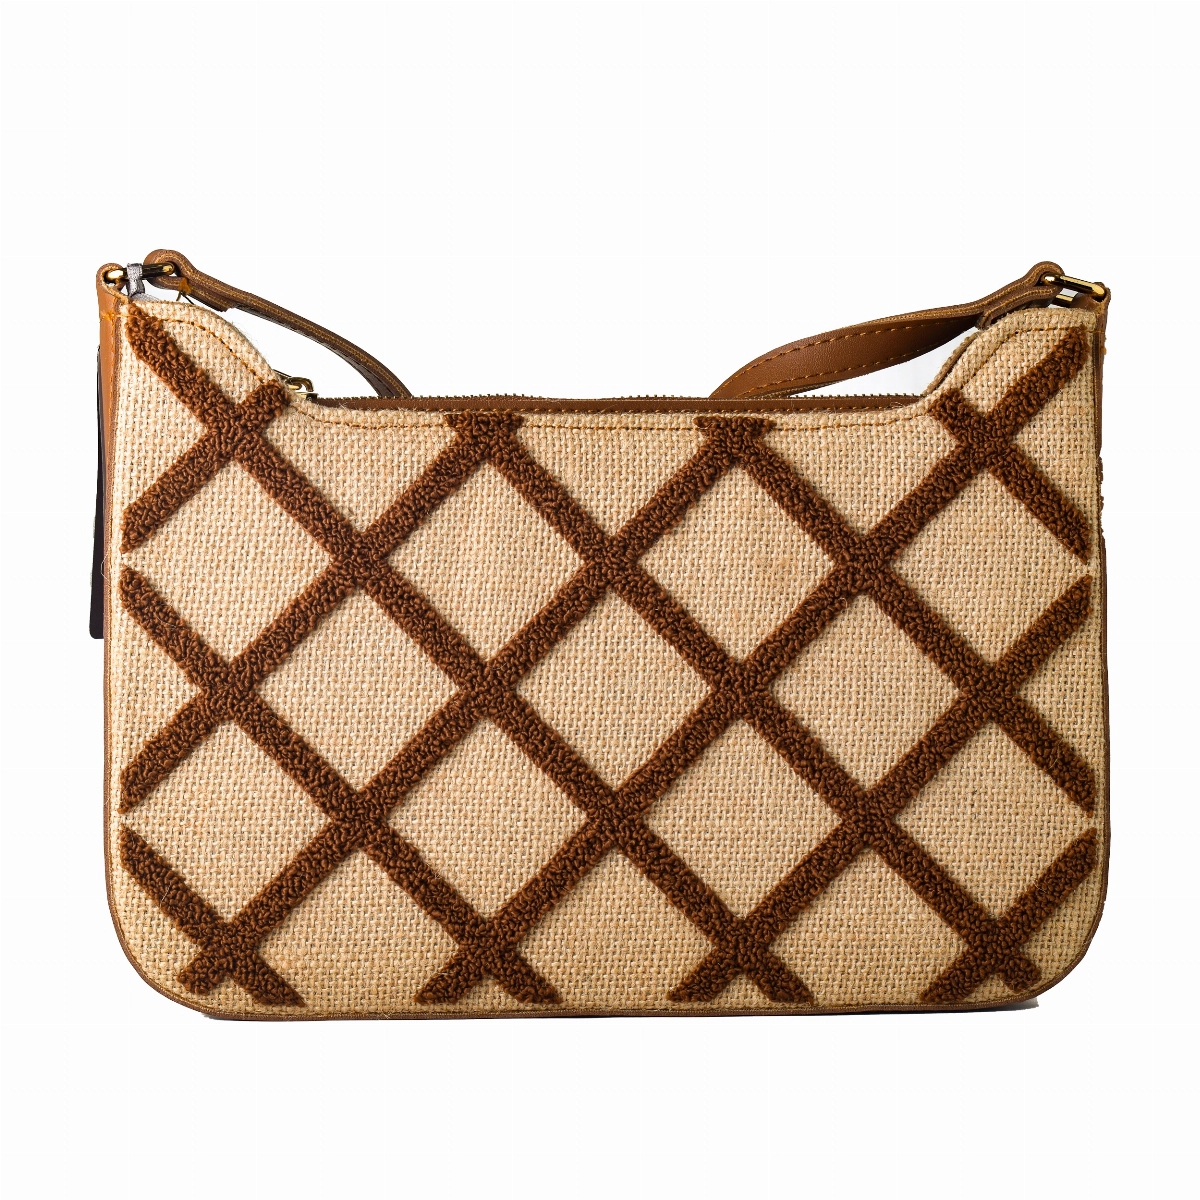 BOLSO LAURA ASHLEY SALWAY-QUILTED-TAN SALWAYQUILETN